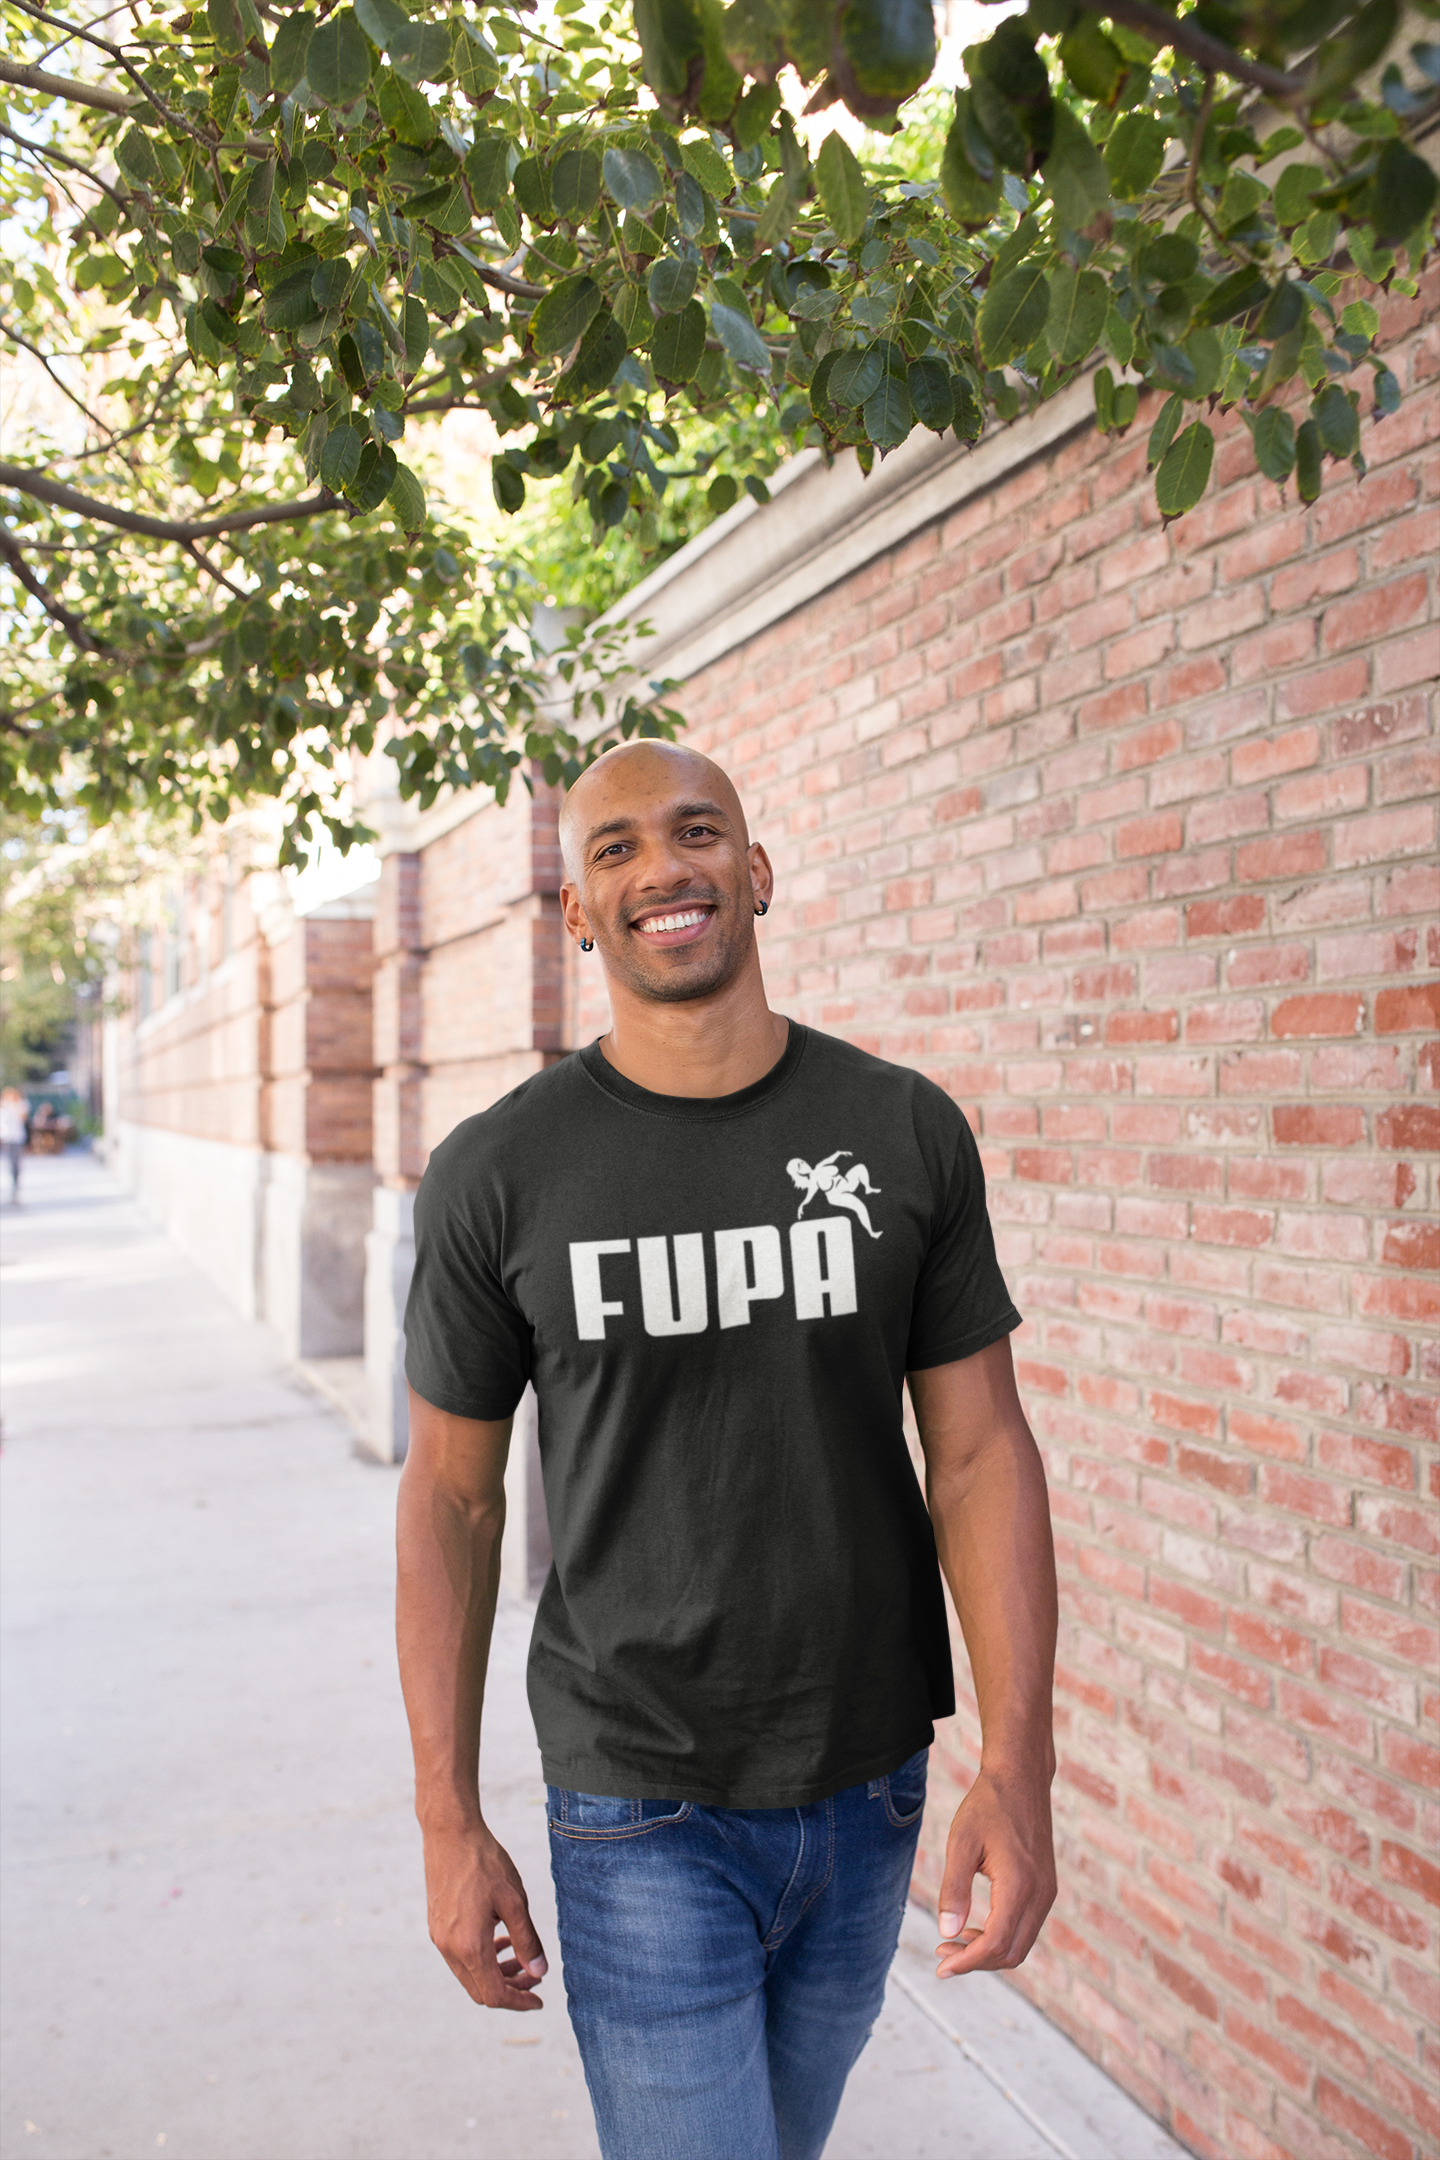 FUPA Cotton Tee – The Dude's Threads